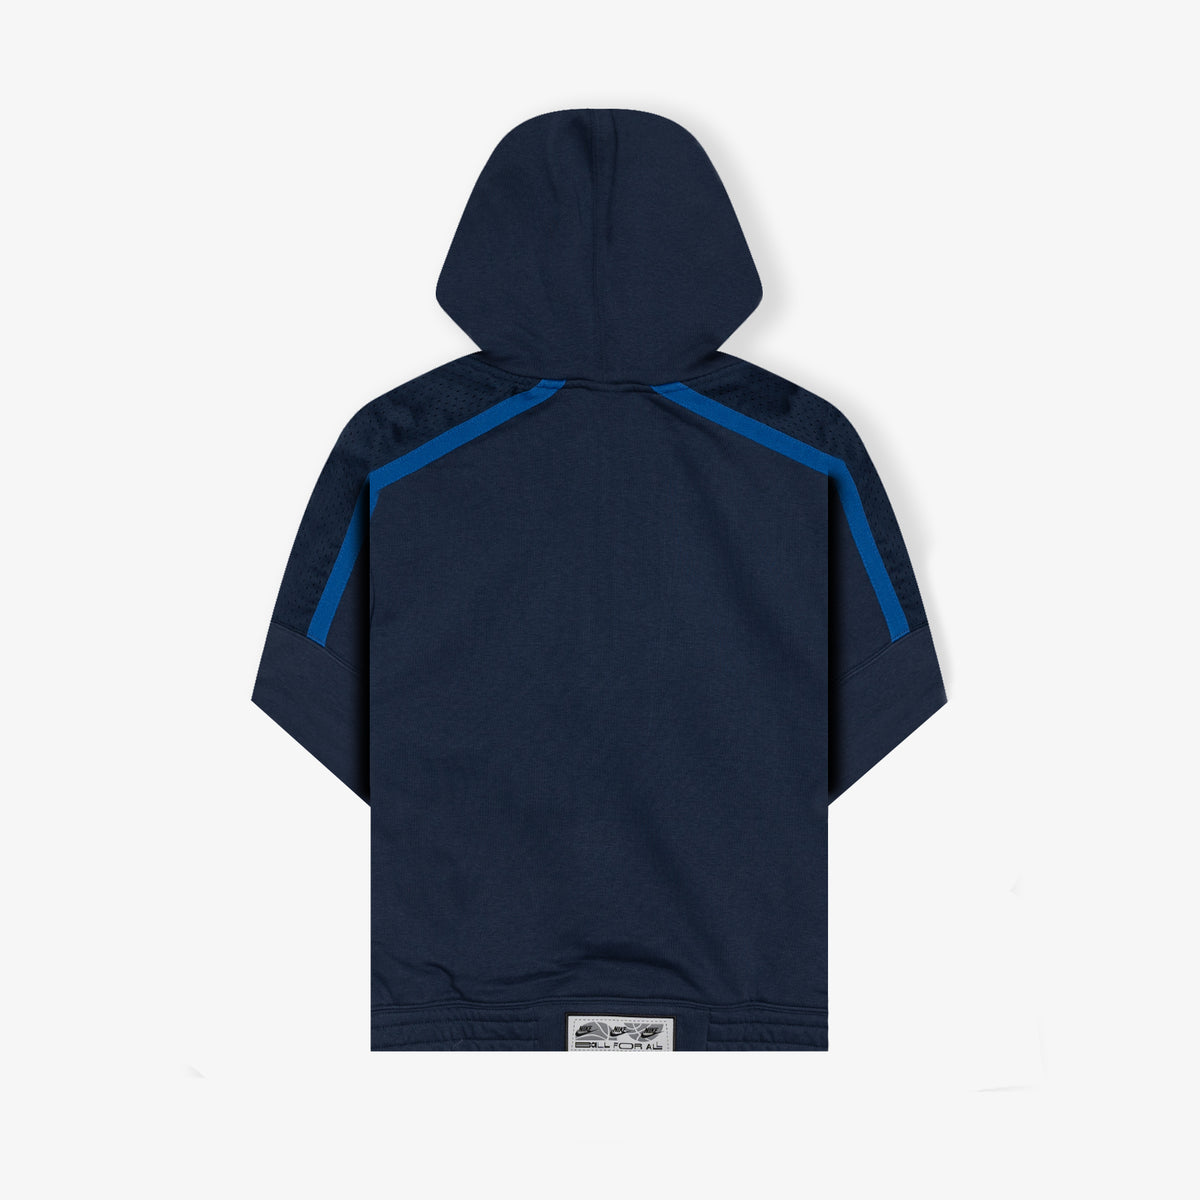 Culture of Basketball Short-Sleeve Youth Hoodie - Navy